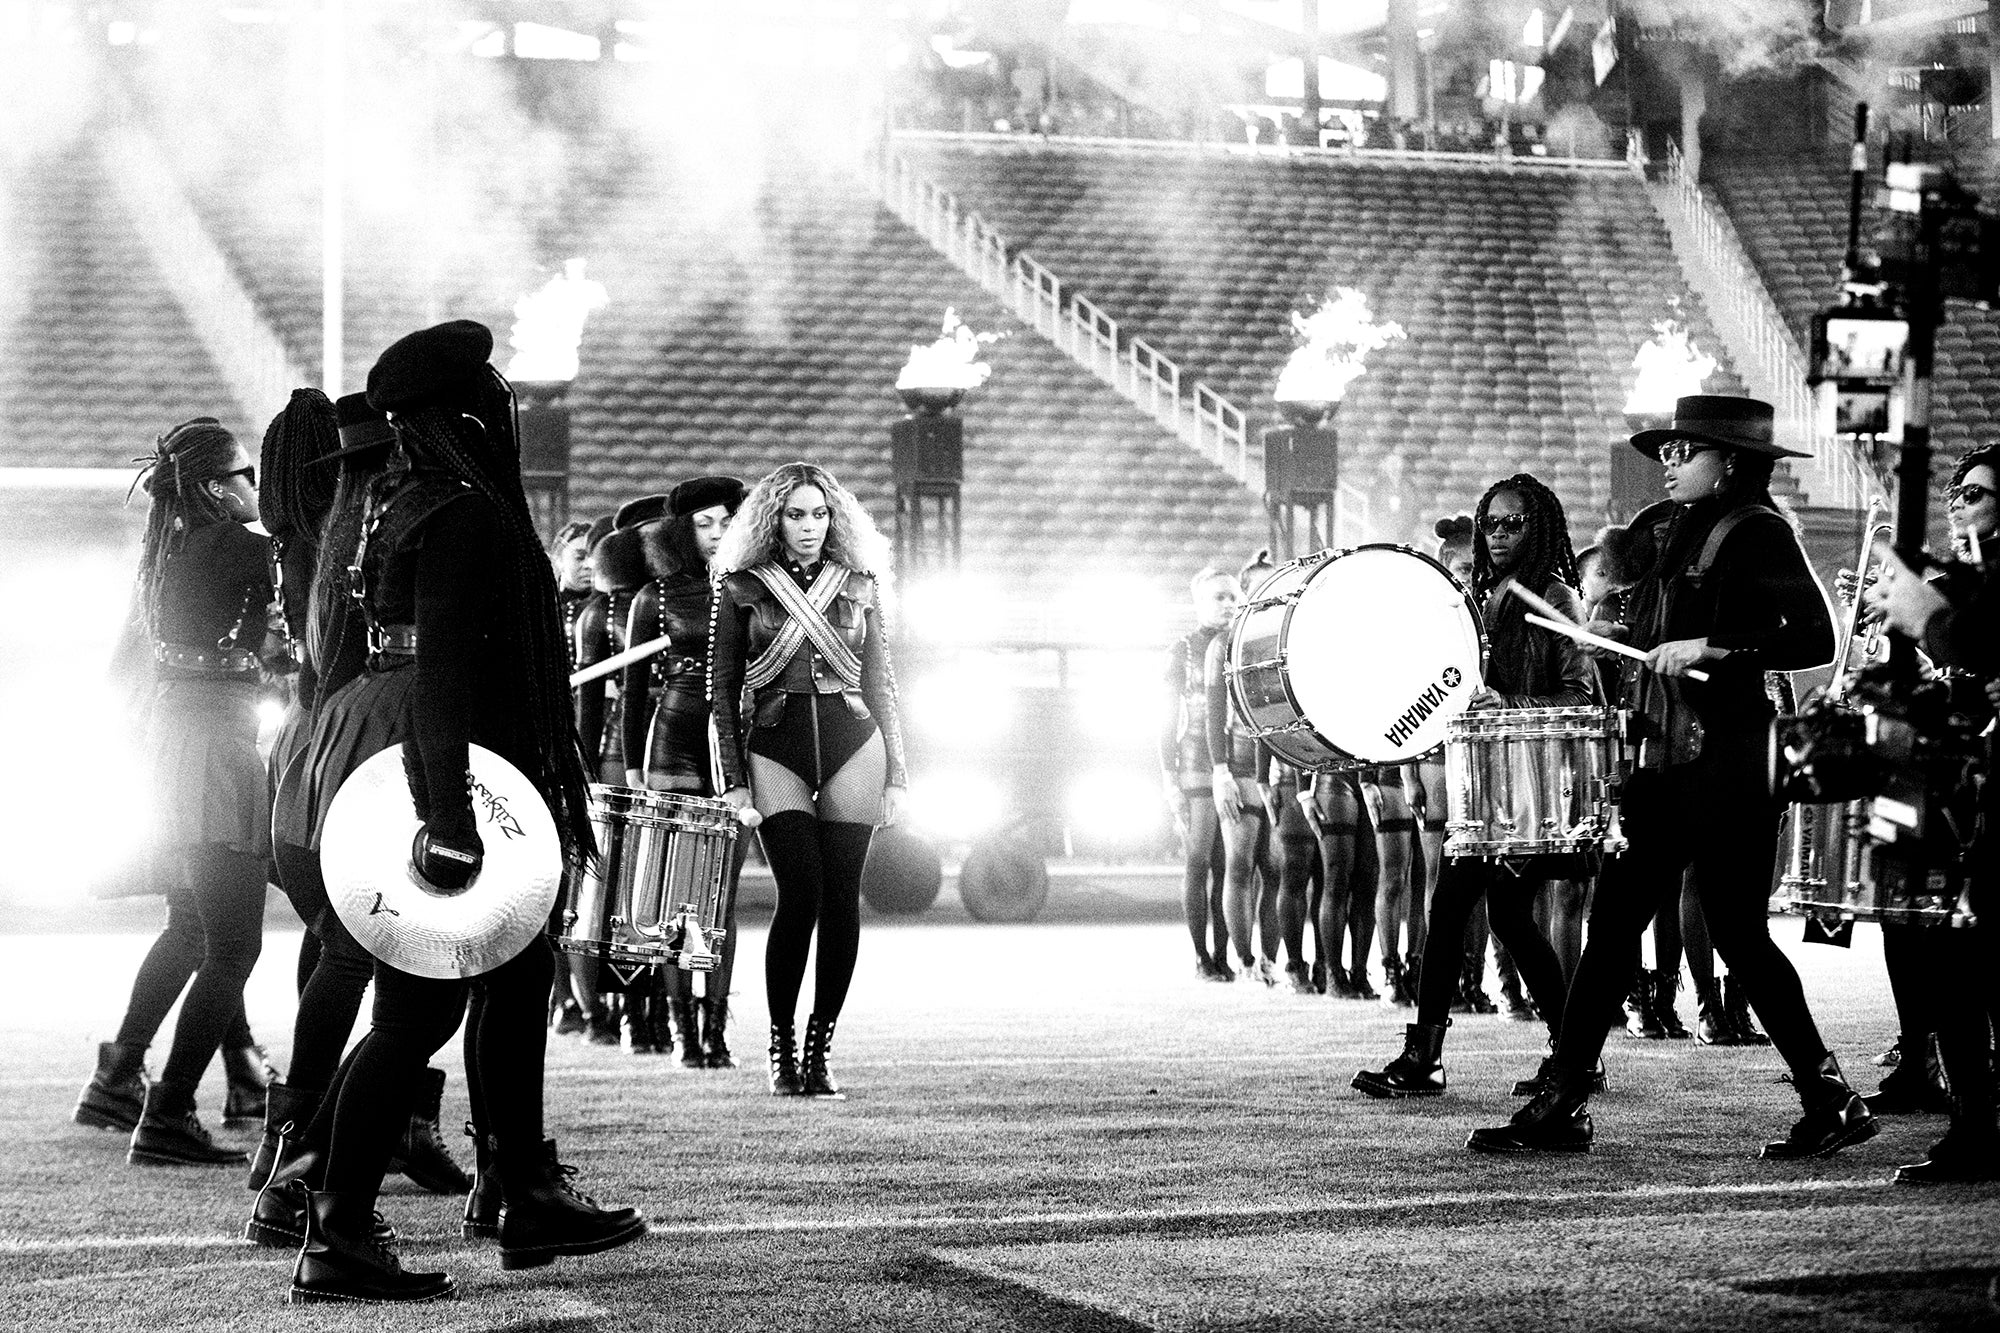 See Stunning Photos Of Beyonce's Super Bowl Performance You Won't Find Anywhere Else